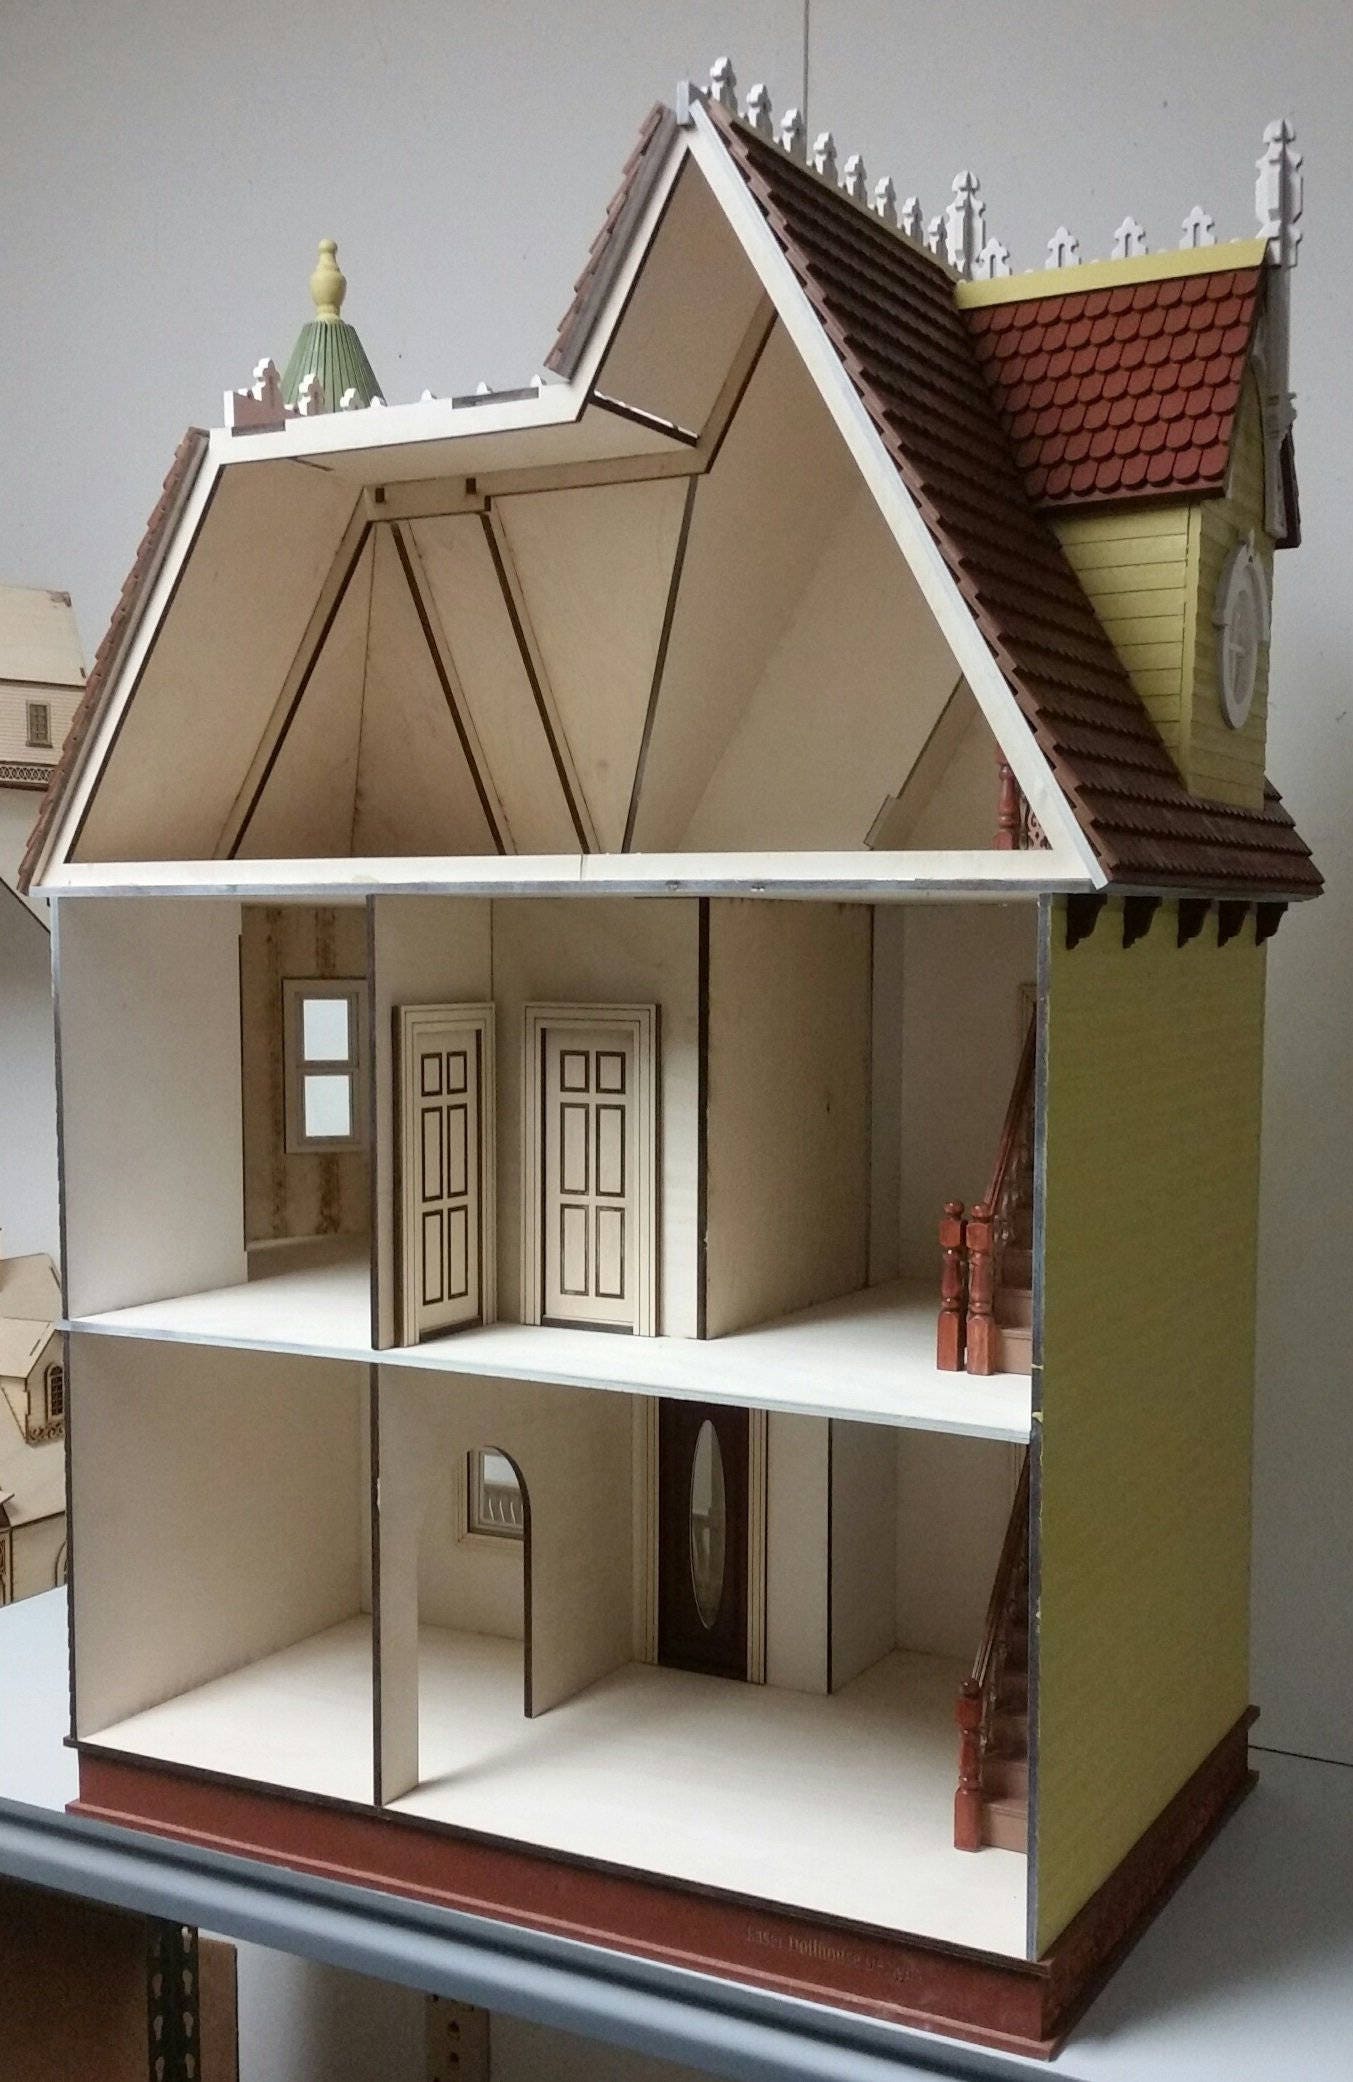 FULLY BUILT. WOODEN DOLL HOUSE (Liana's Place)HANDMADE of wood 1:12 scale